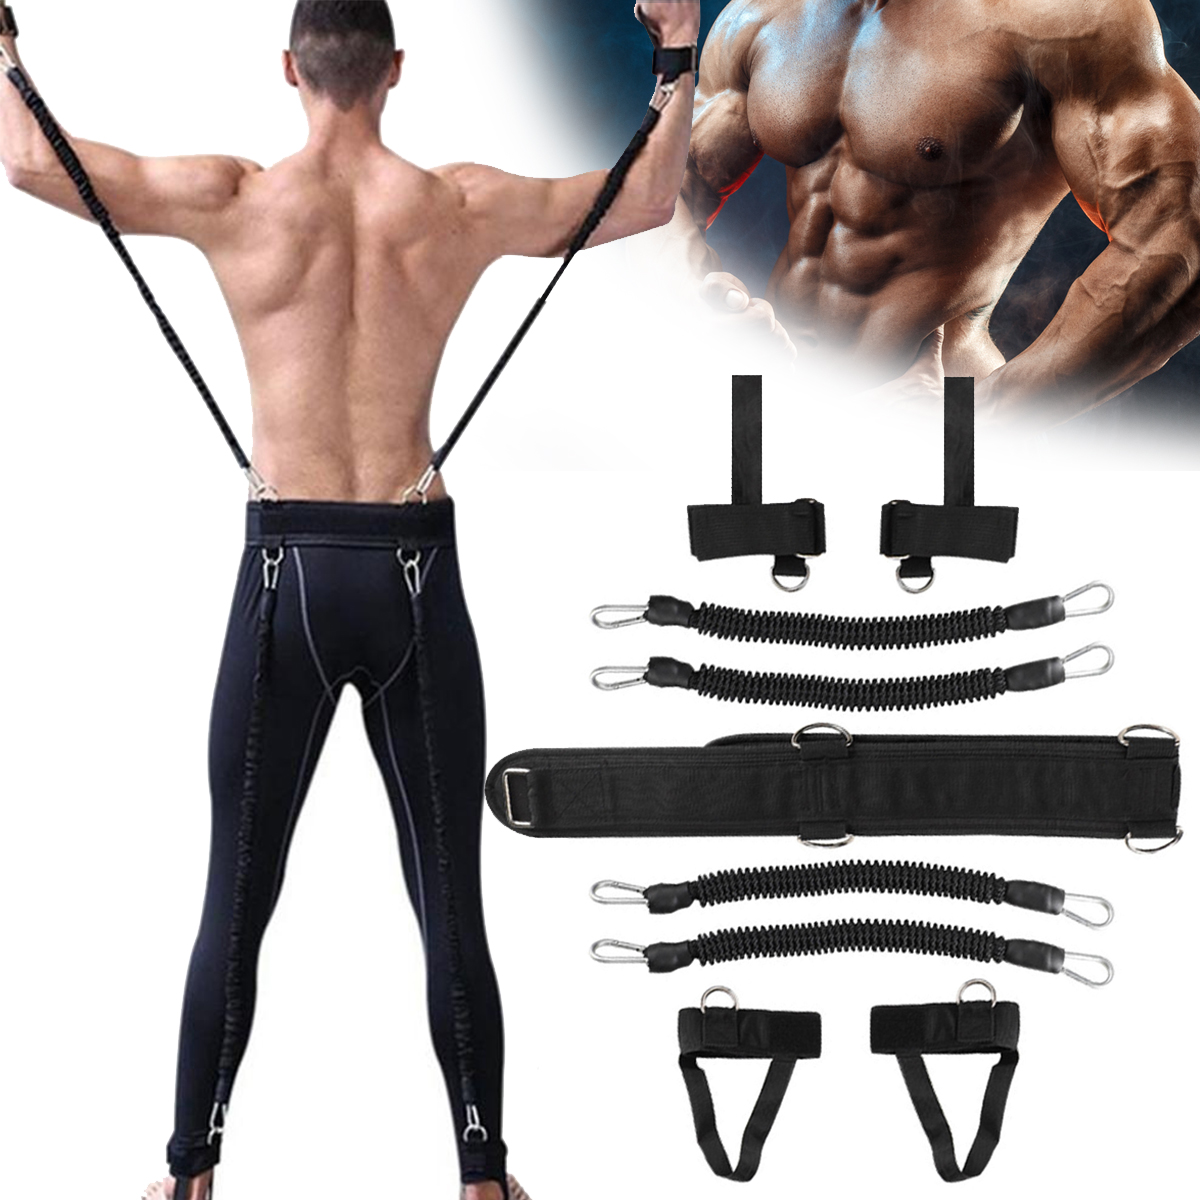 Home-Gym-Strength-Training-Resistance-Band-Basketball-Strength-Exercise-Pull-Rope-Boxing-Sports-Fitn-1792138-2